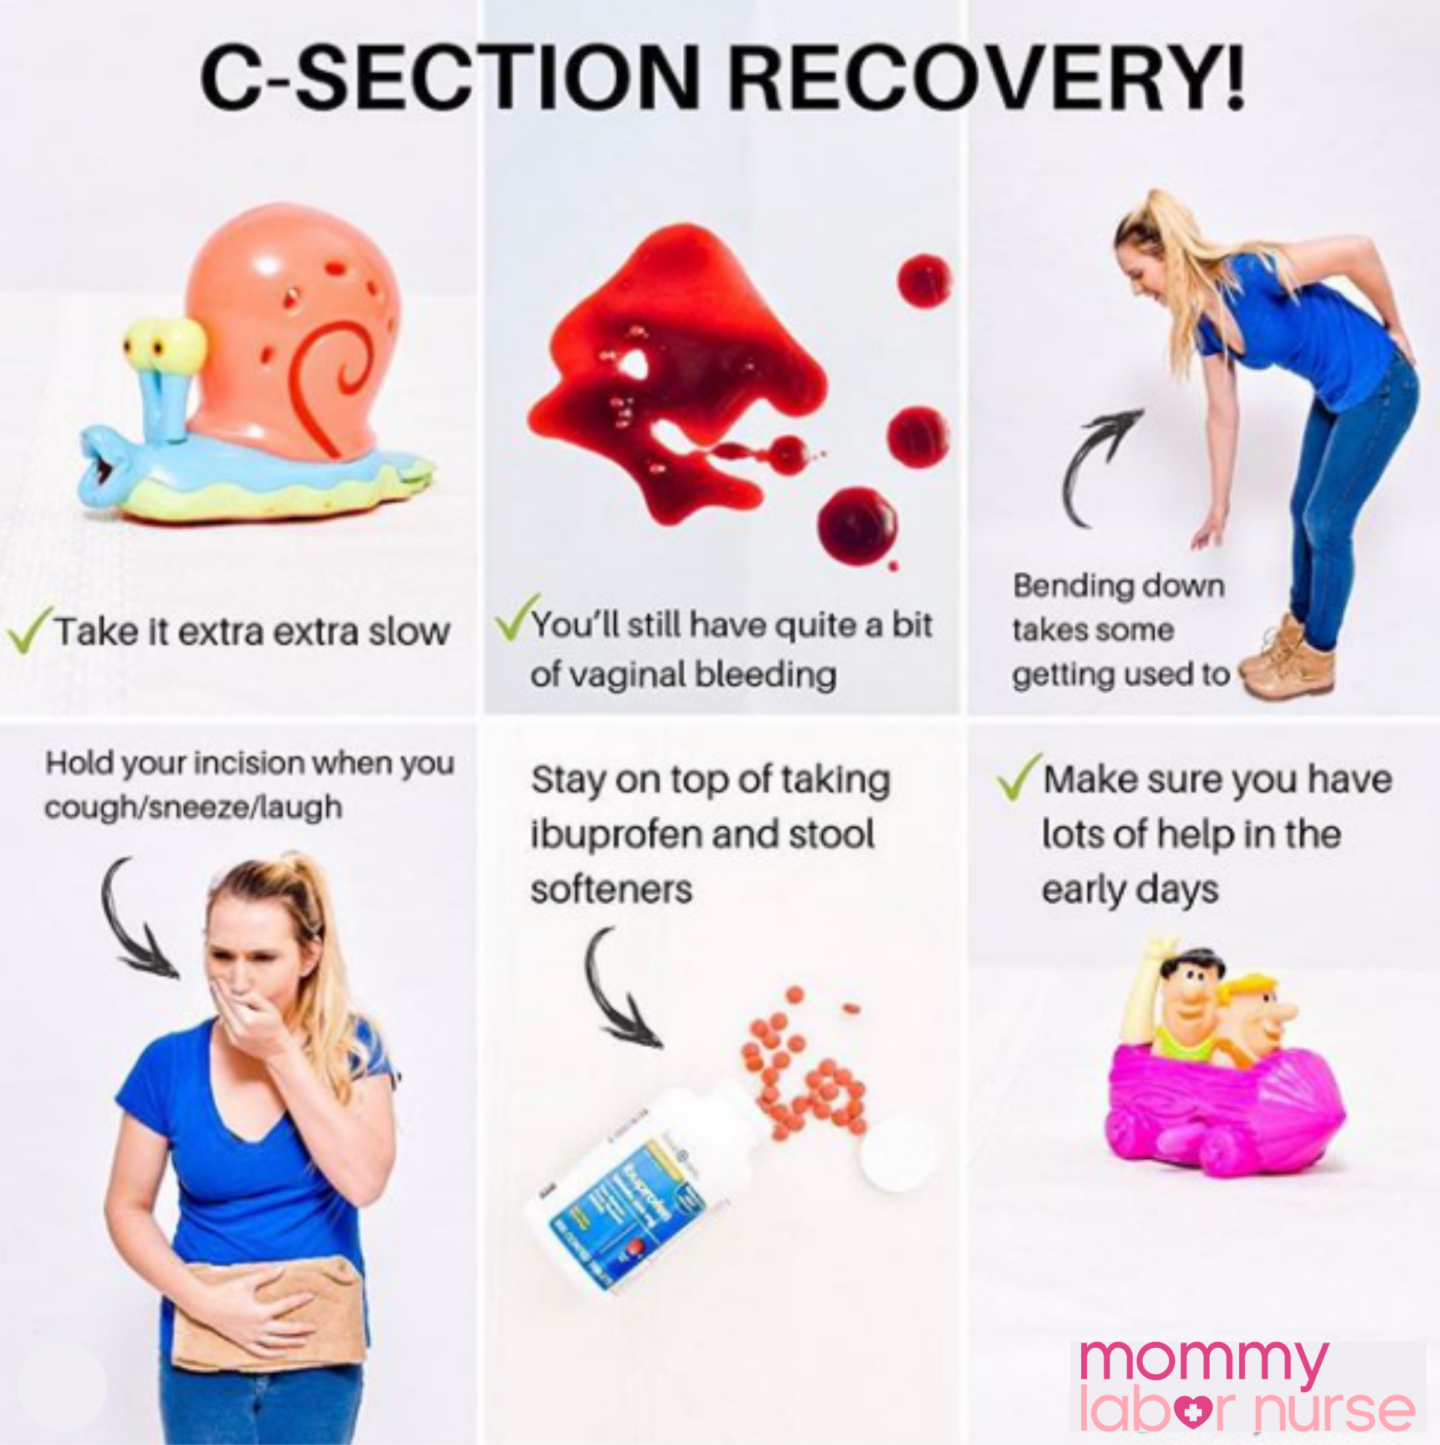 7 ways to heal faster after your C-section